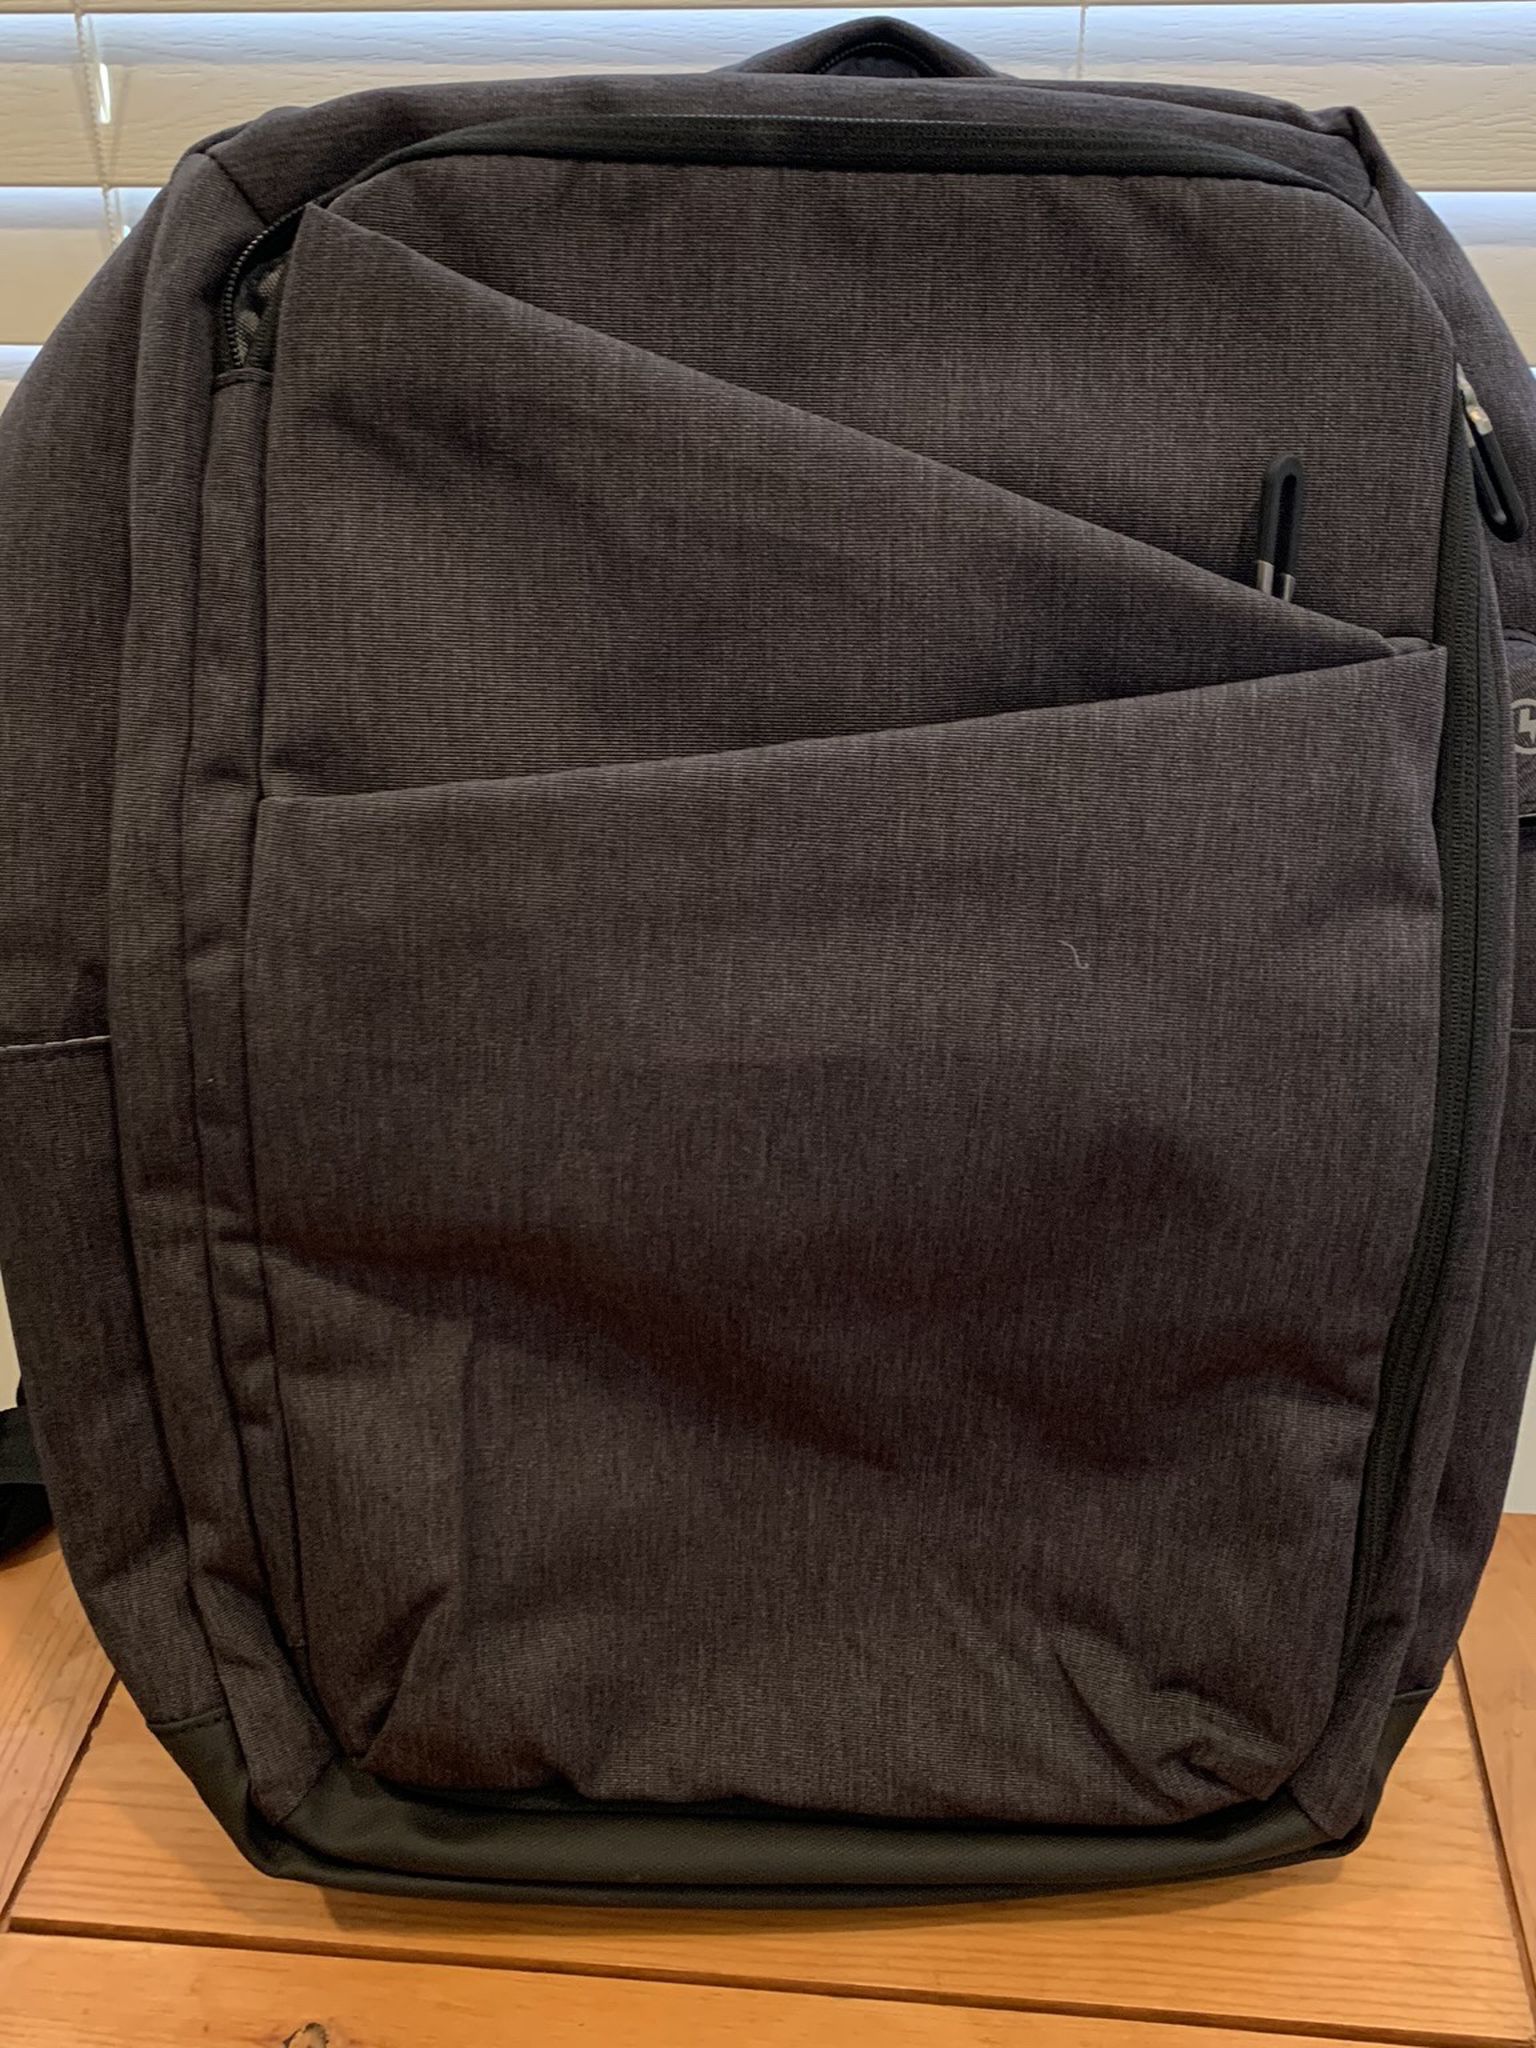 Backpack For Laptop- Never Used!